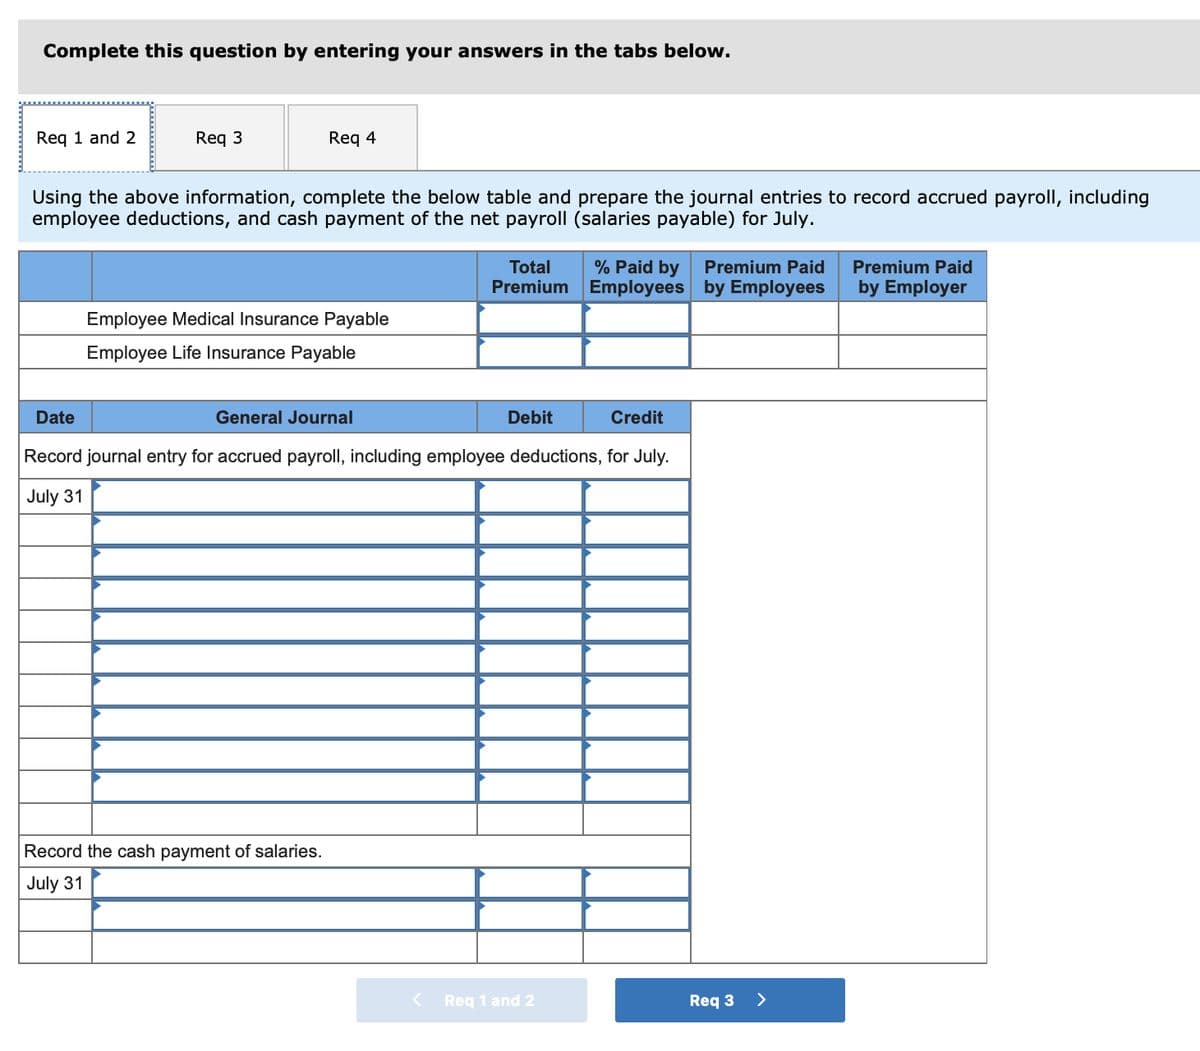 Complete this question by entering your answers in the tabs below.
Req 1 and 2
Req 3
Req 4
Using the above information, complete the below table and prepare the journal entries to record accrued payroll, including
employee deductions, and cash payment of the net payroll (salaries payable) for July.
Employee Medical Insurance Payable
Employee Life Insurance Payable
Record the cash payment of salaries.
July 31
Total
Premium
Debit
Date
General Journal
Credit
Record journal entry for accrued payroll, including employee deductions, for July.
July 31
% Paid by
Employees
Req 1 and 2
Premium Paid
by Employees
Req 3
>
Premium Paid
by Employer